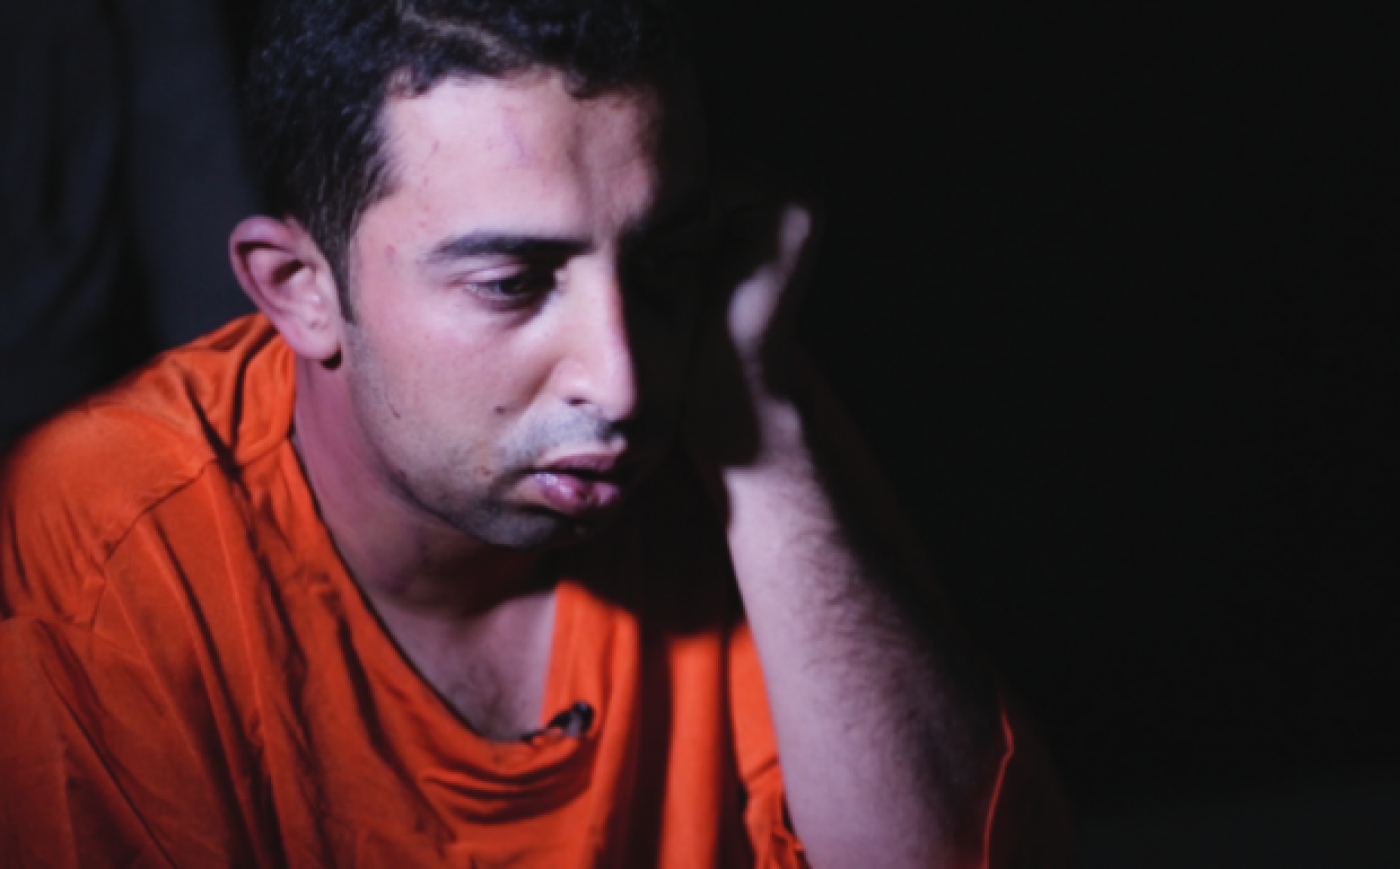 A after IS murder of Jordanian pilot, questions remain | Middle East Eye